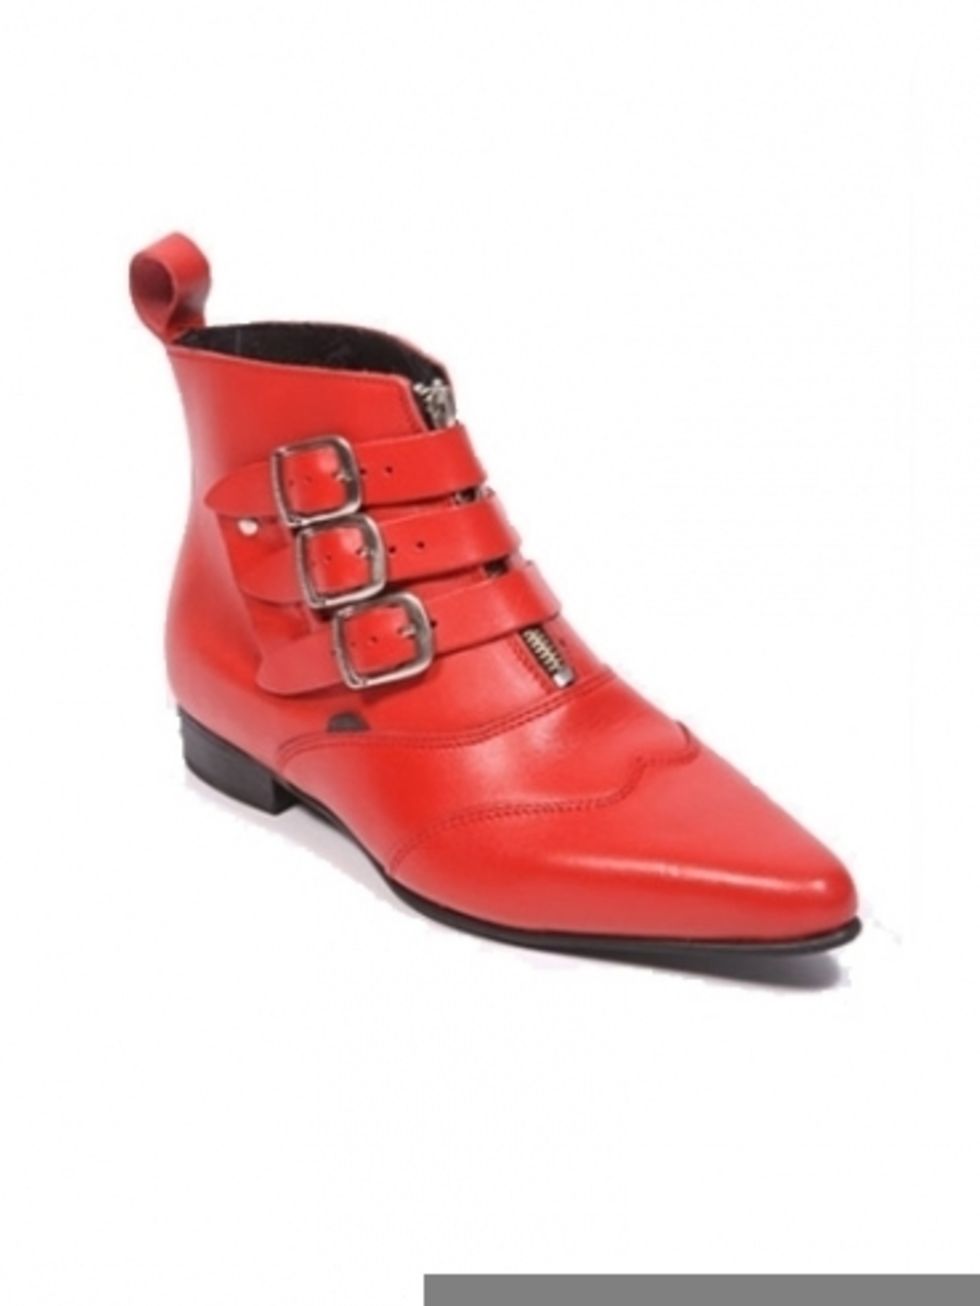 Footwear, Product, Red, White, Carmine, Leather, Maroon, Material property, Boot, Coquelicot, 